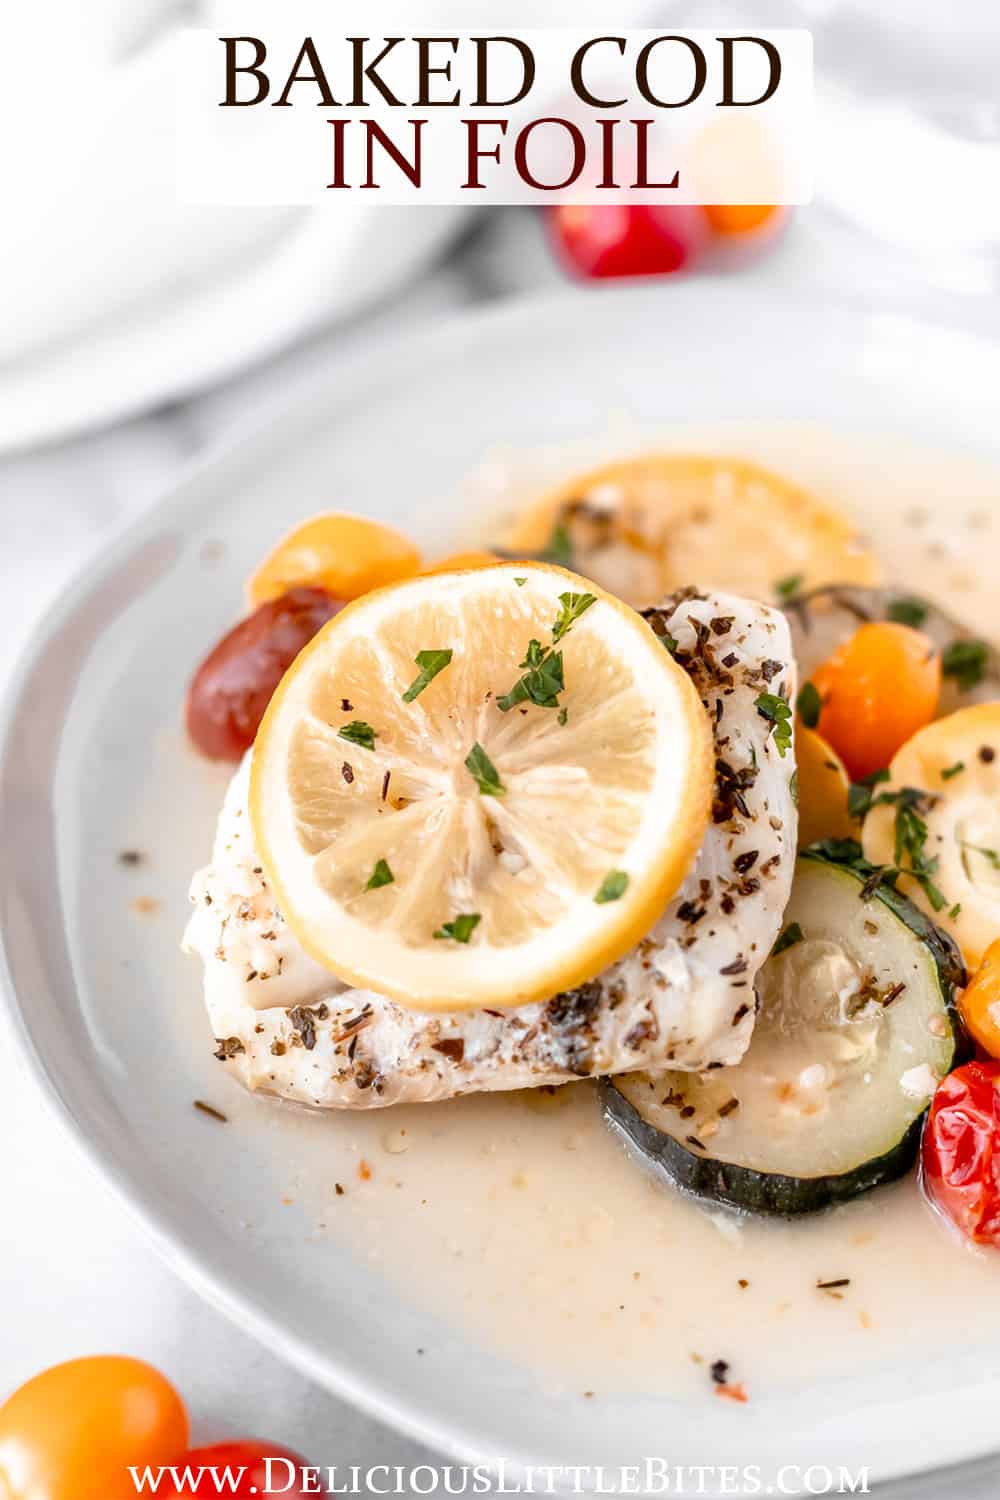 Baked cod and vegetables topped with lemon on a white plate with text overlay.